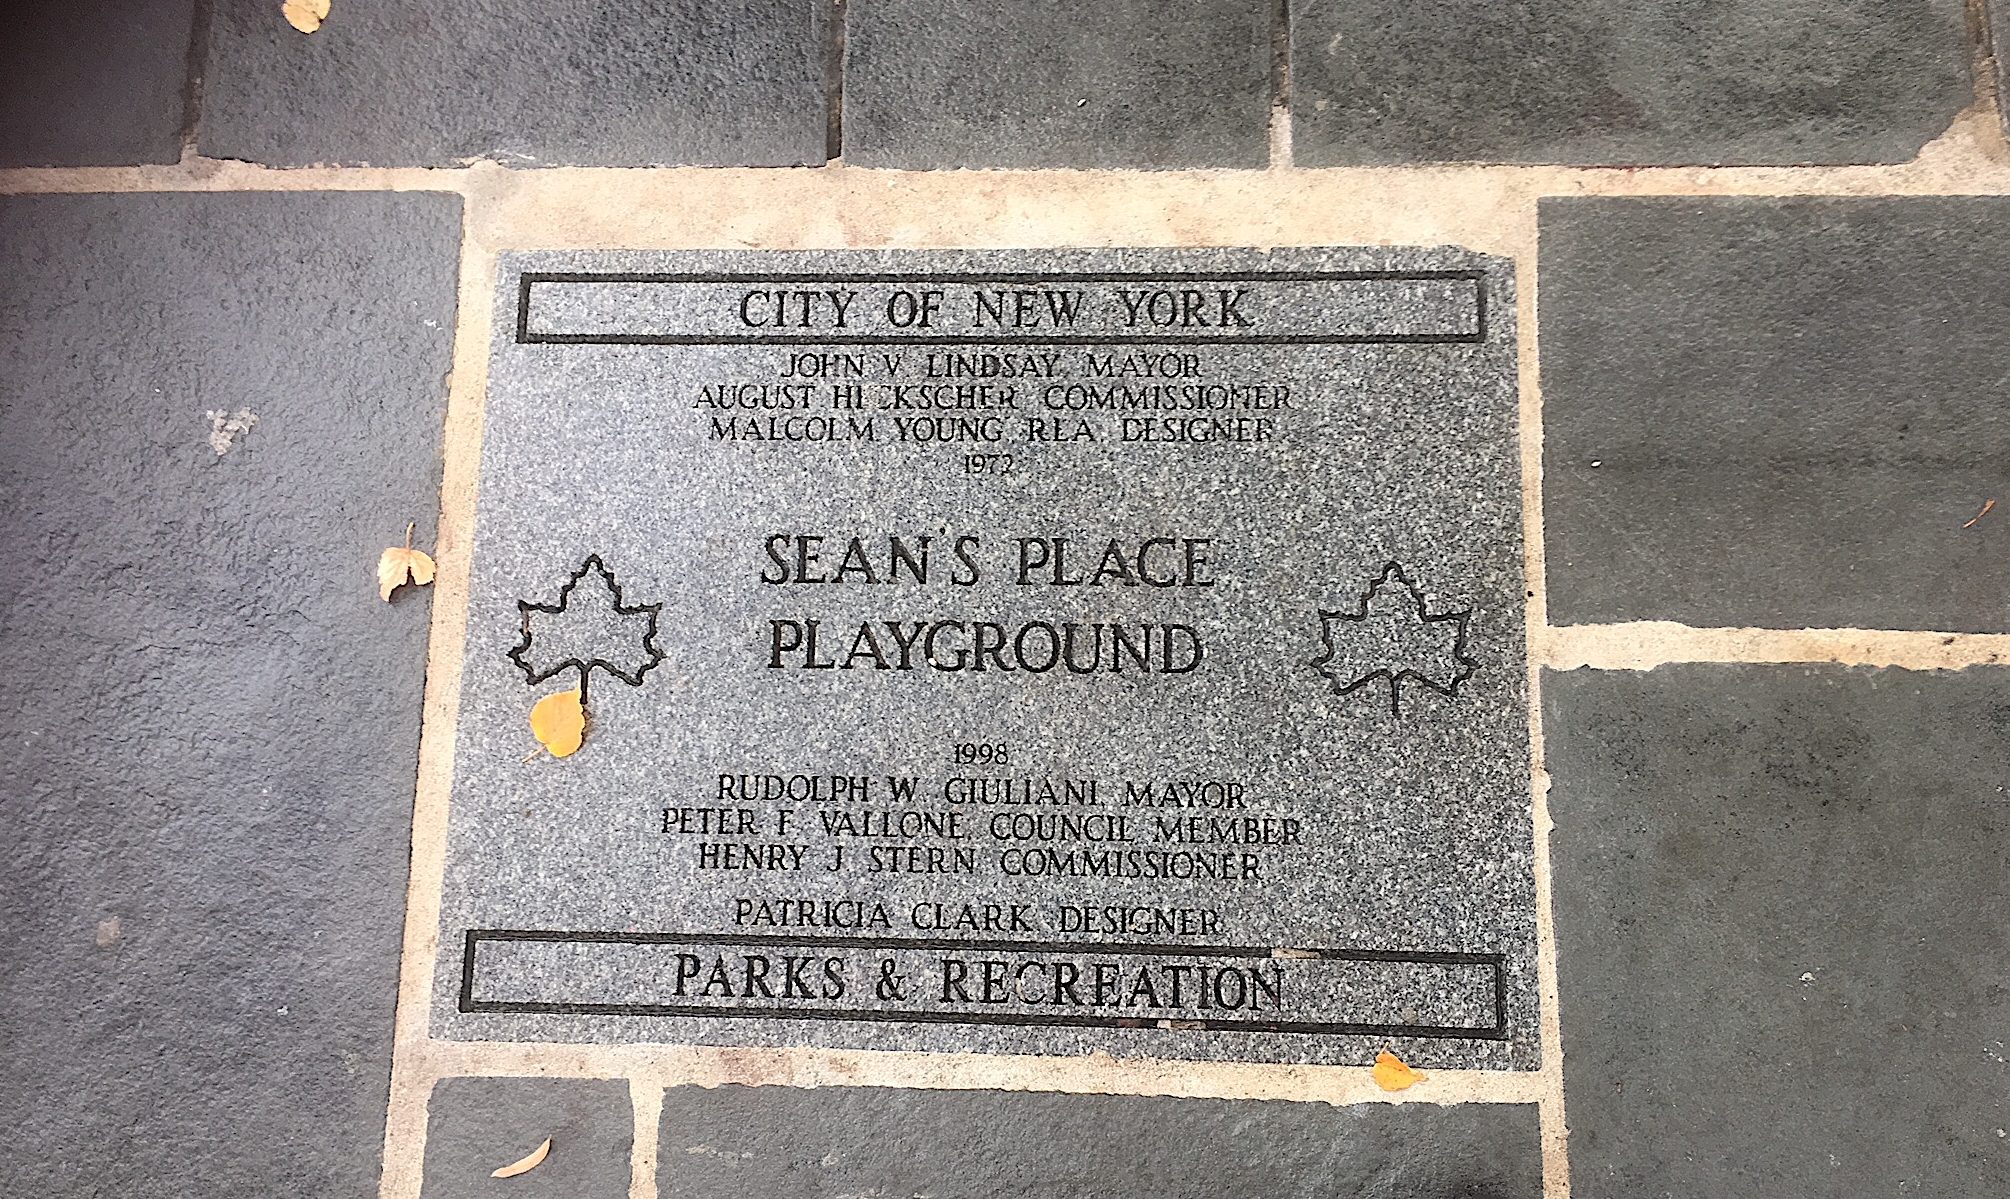 Sean’s Place Reopens After Renovations